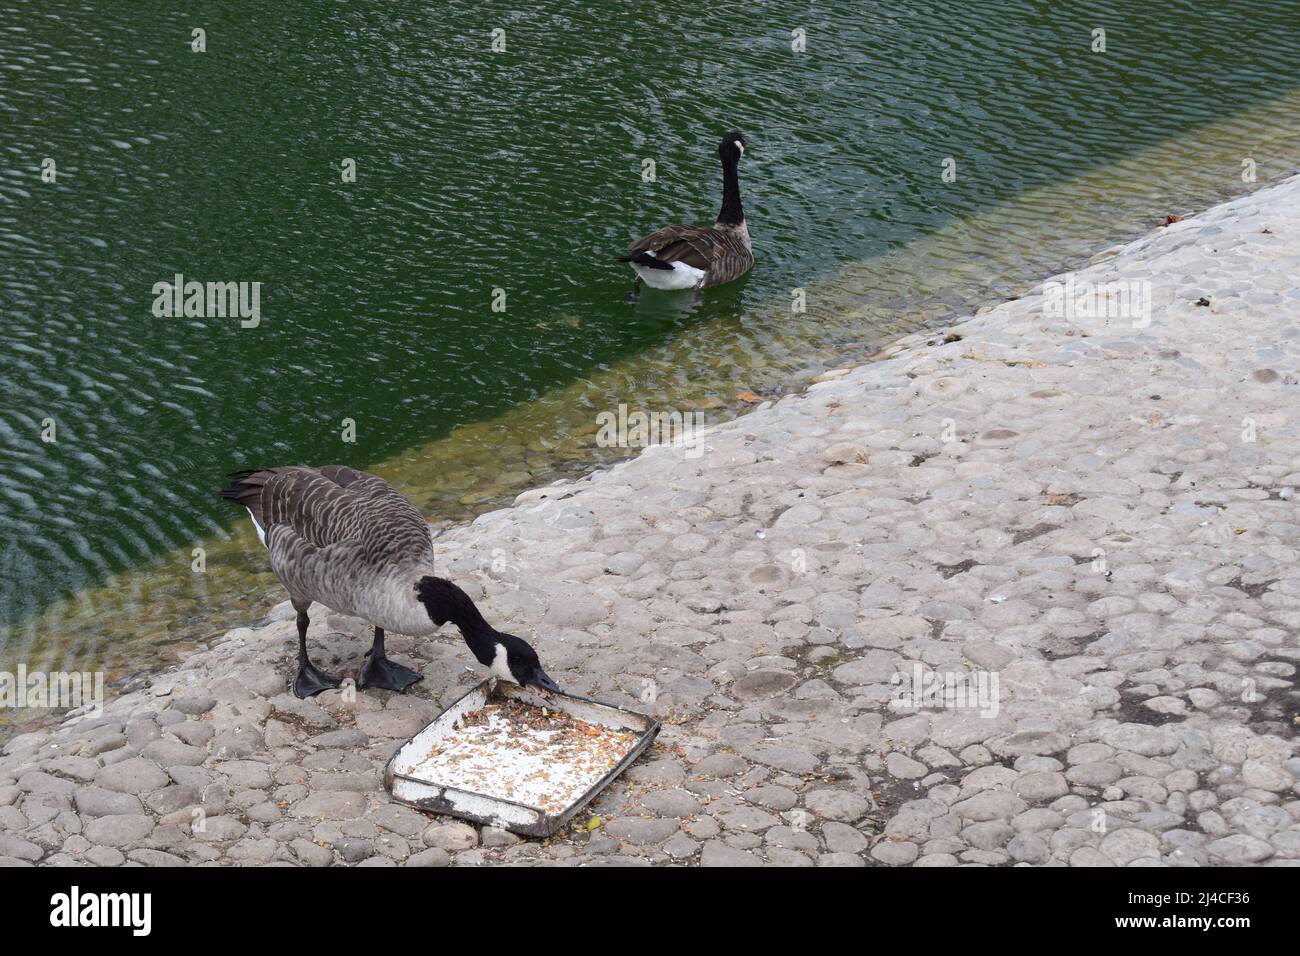 Canada gooses. Canada goose, Branta canadensis, bird on water and one bird is feeding Stock Photo